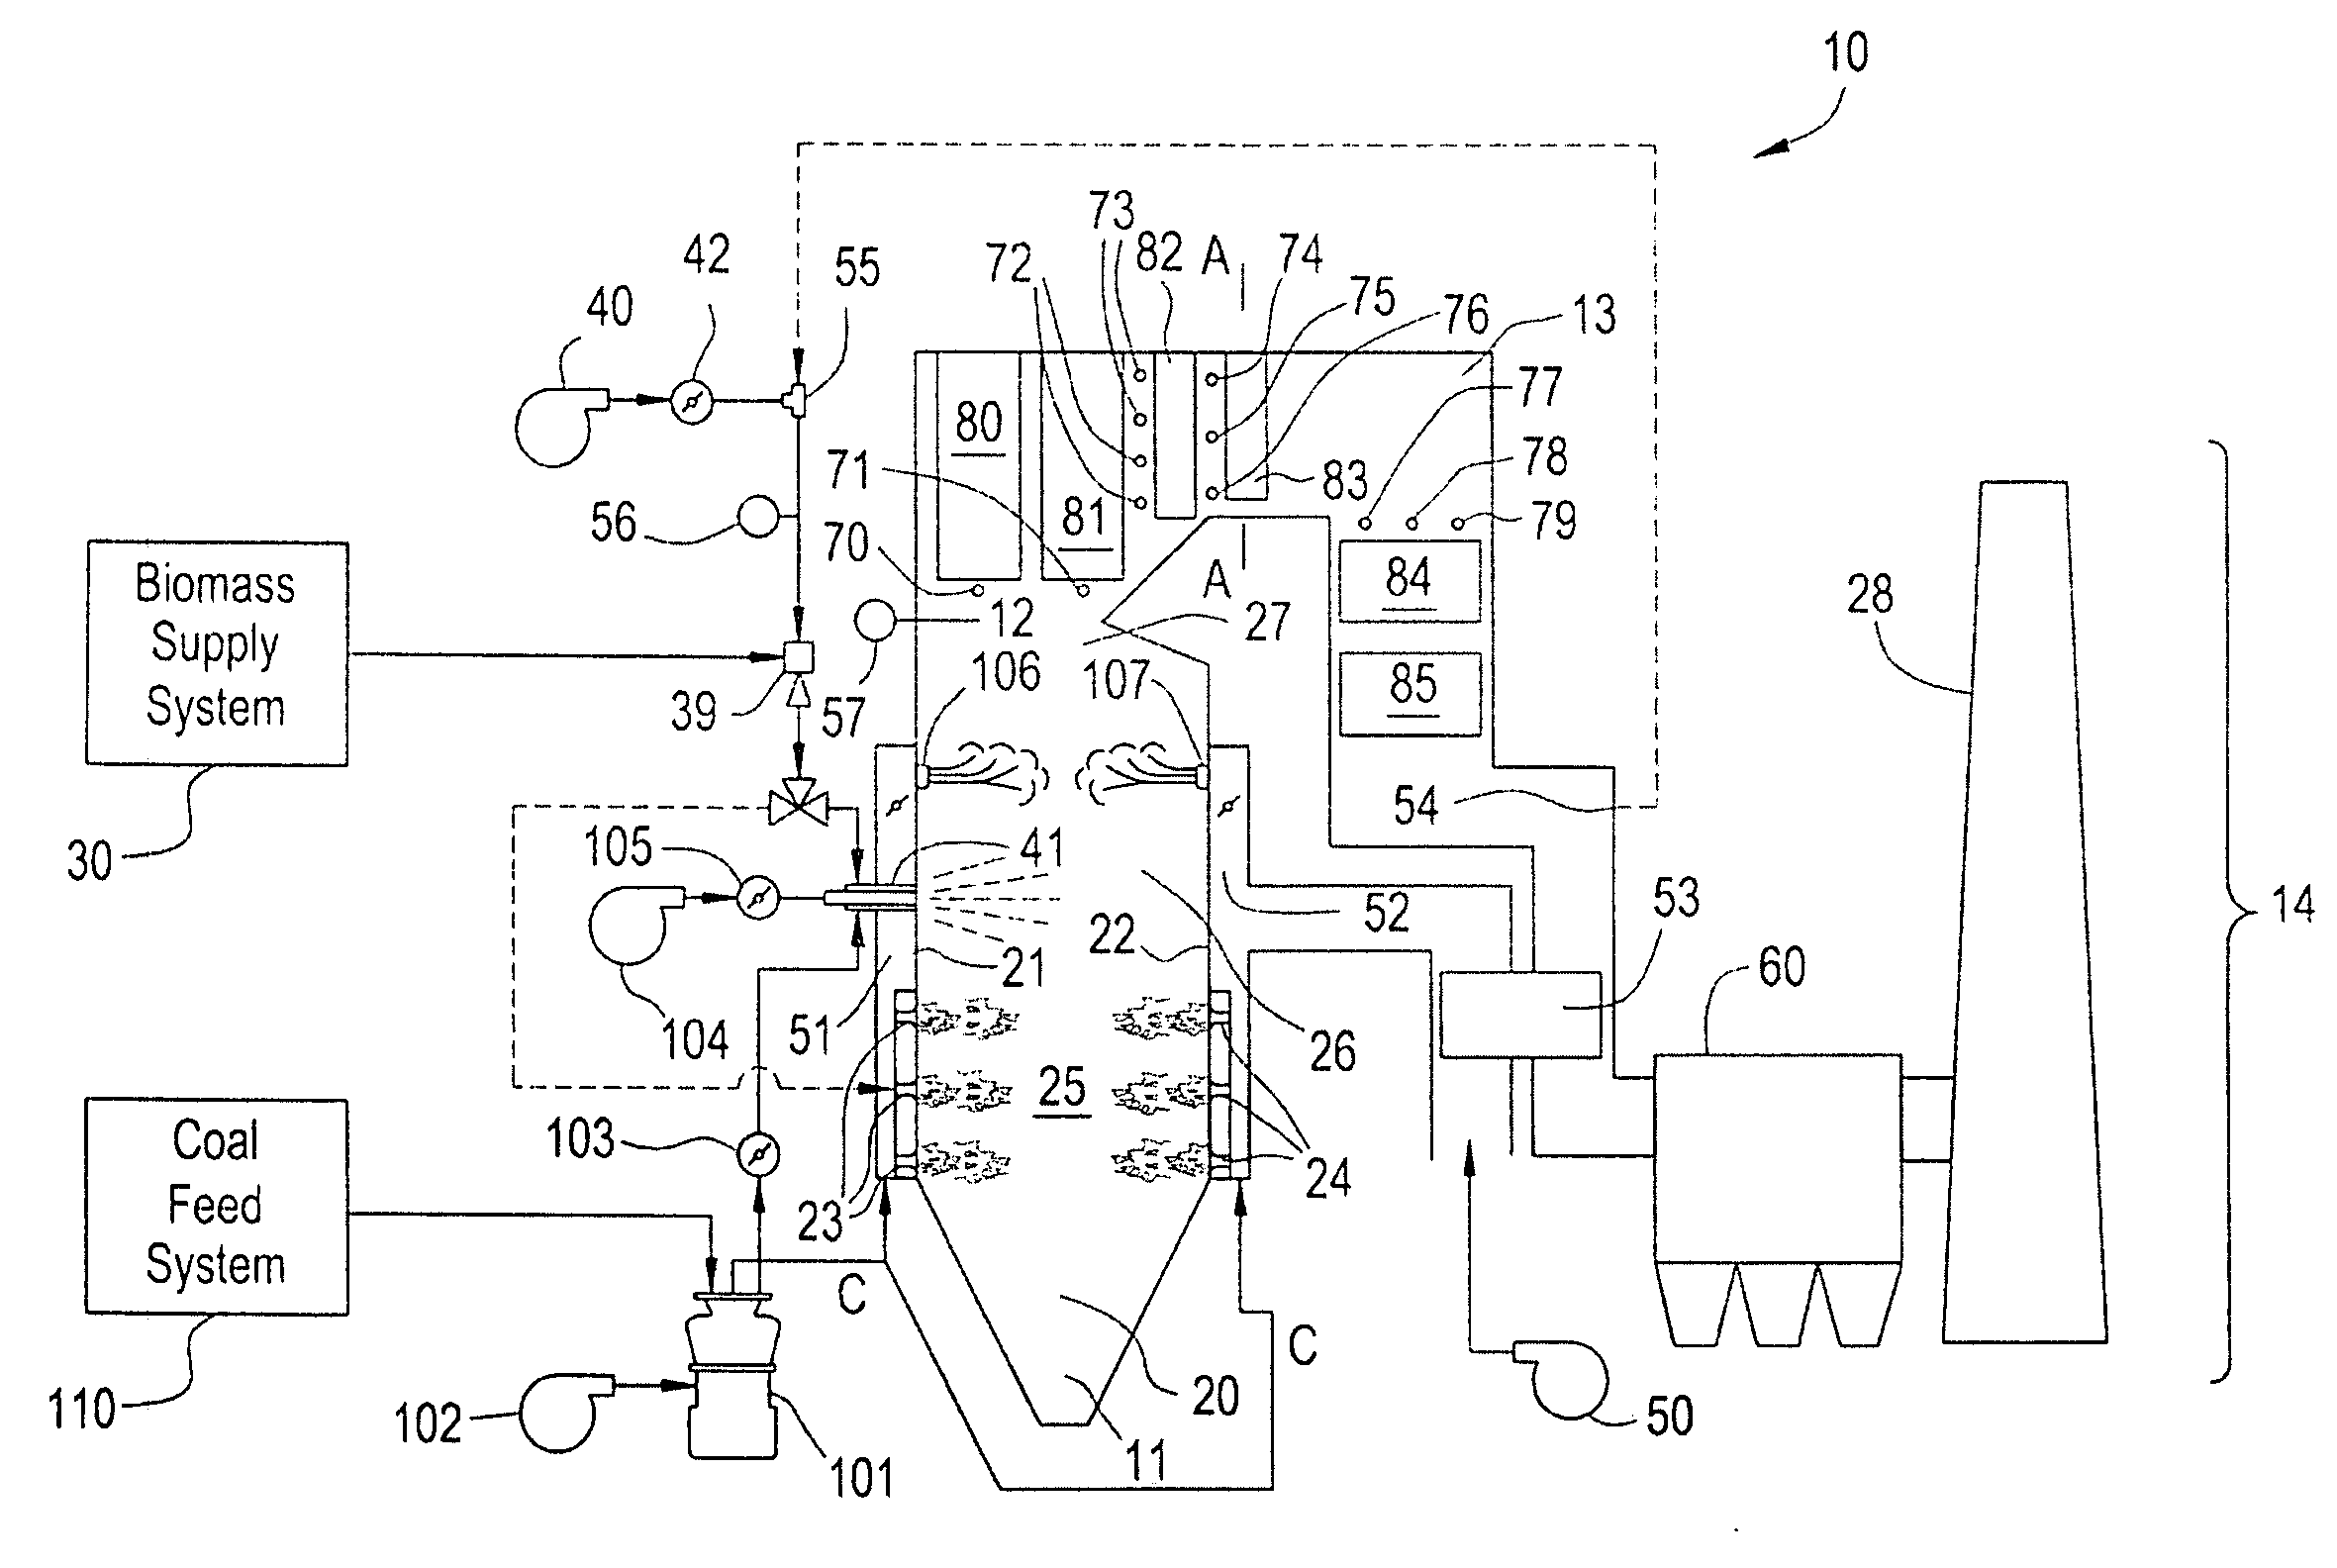 Method and apparatus for operating a fuel flexible furnace to reduce pollutants in emissions